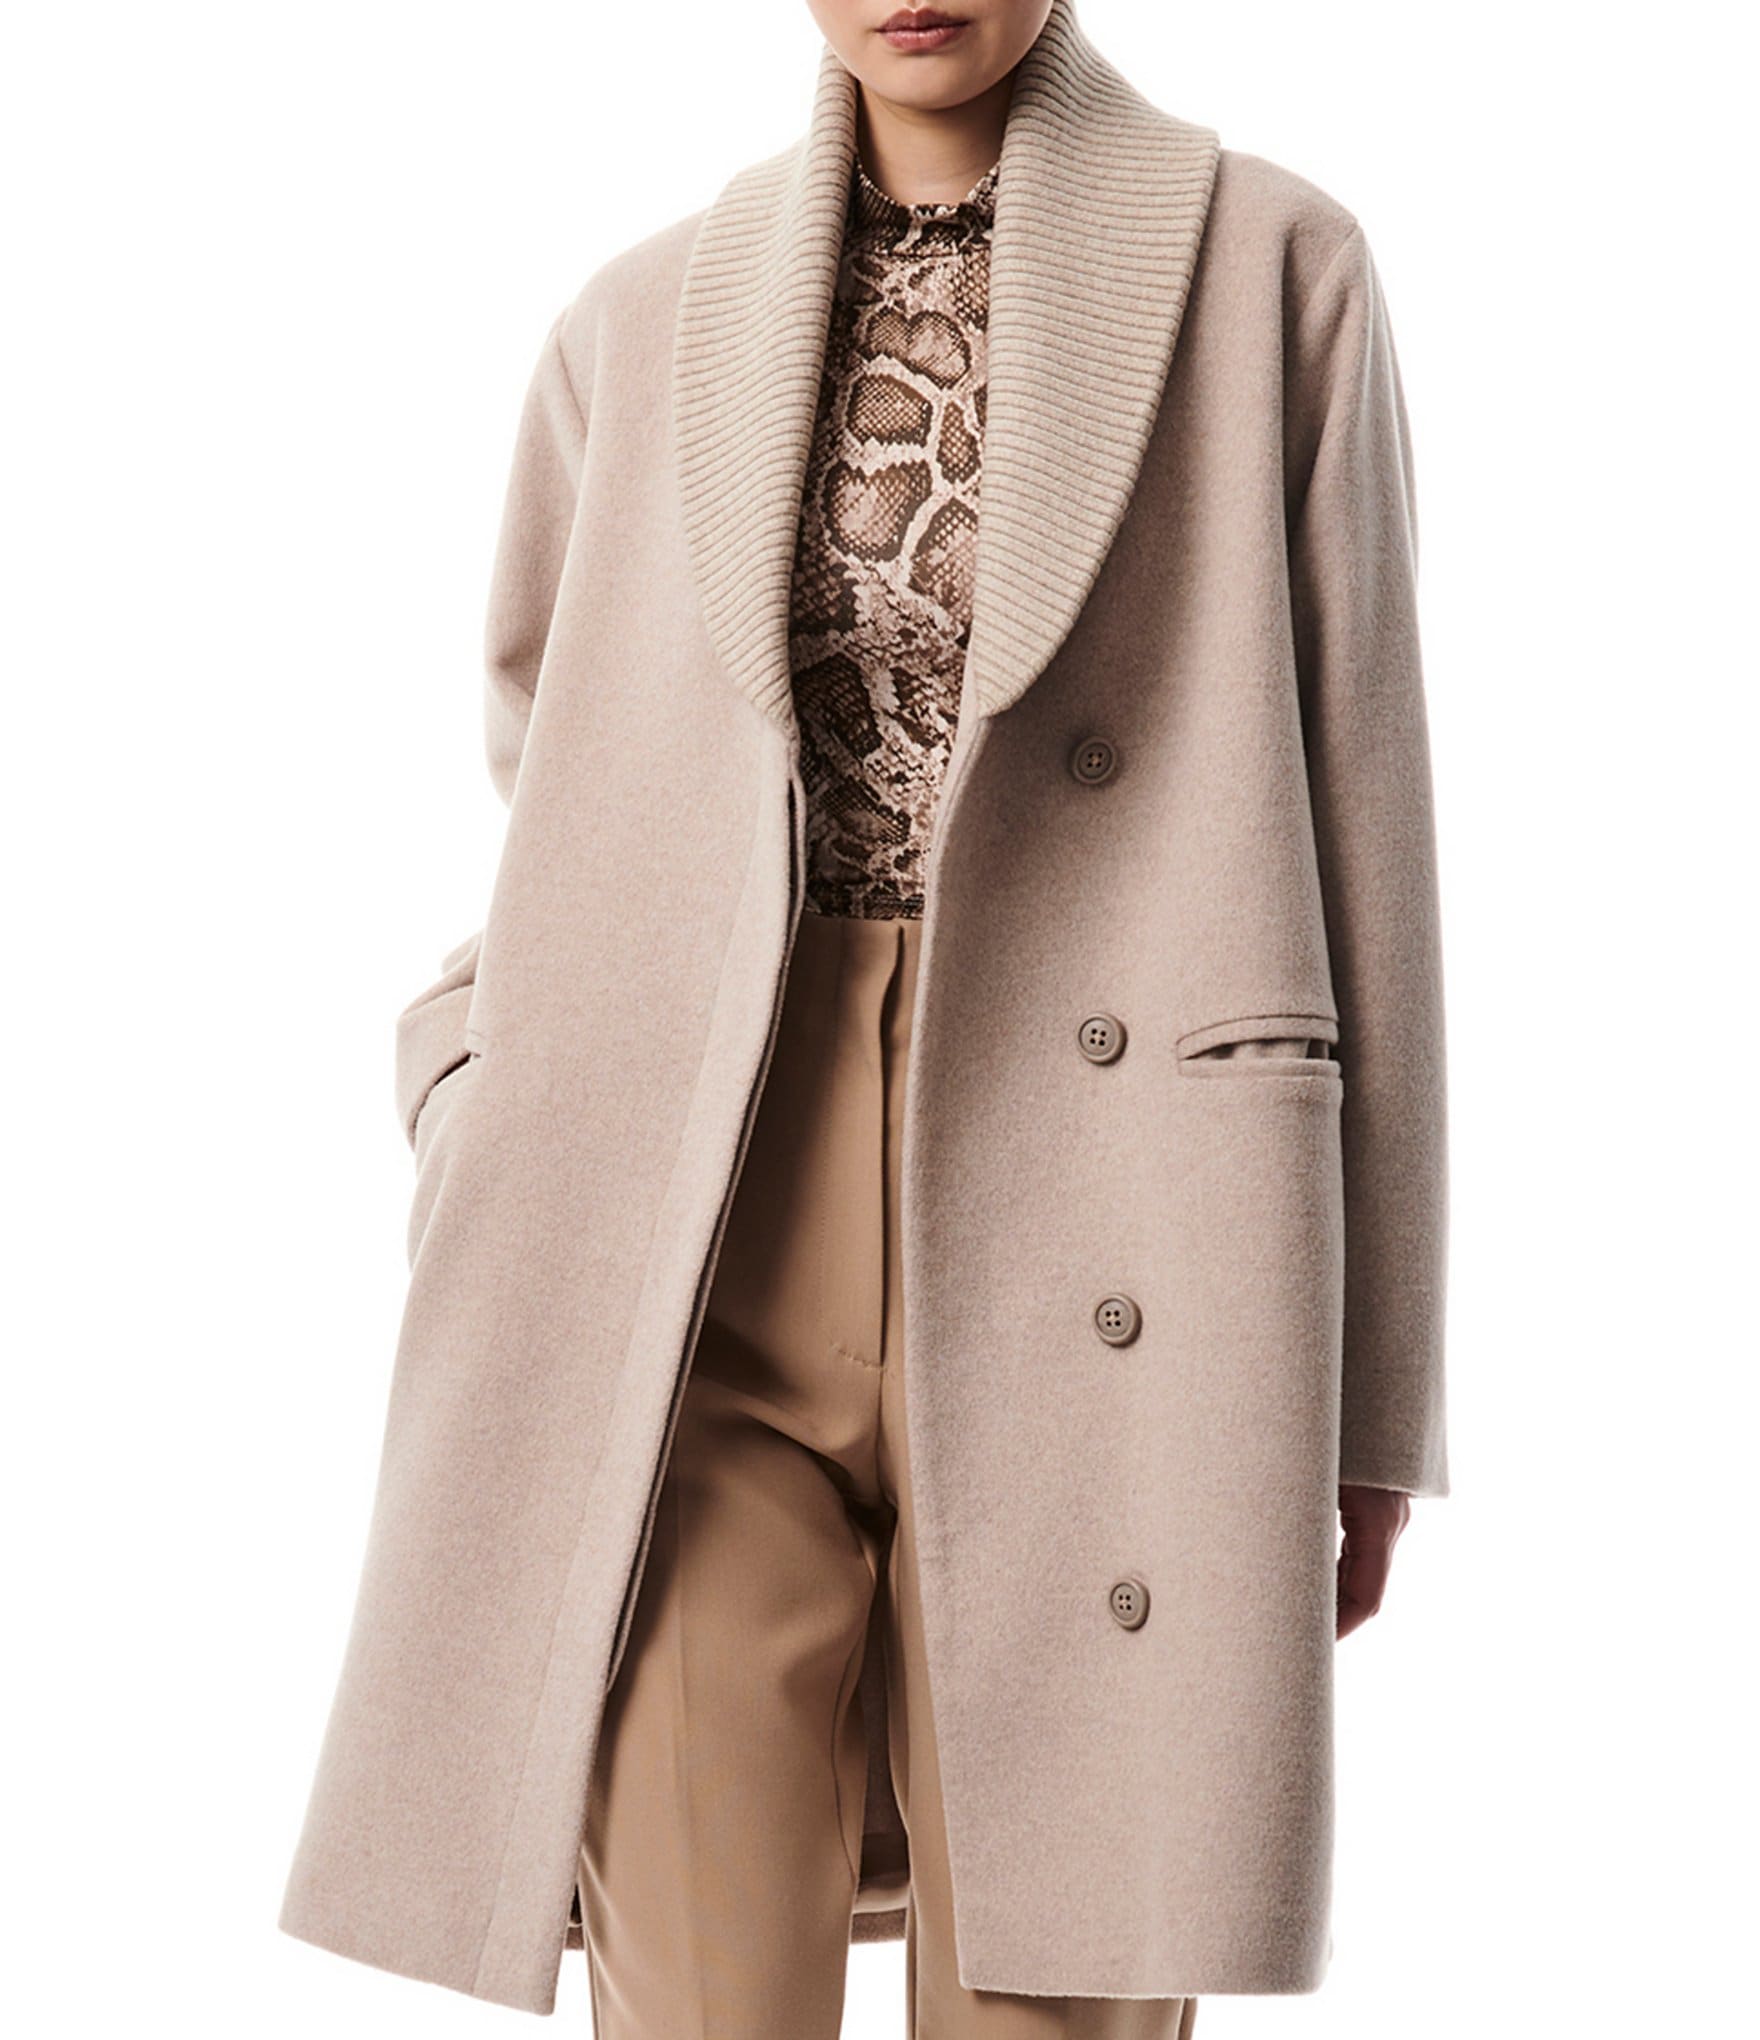 Dillard's - The classic wool blend coat can be dressed up